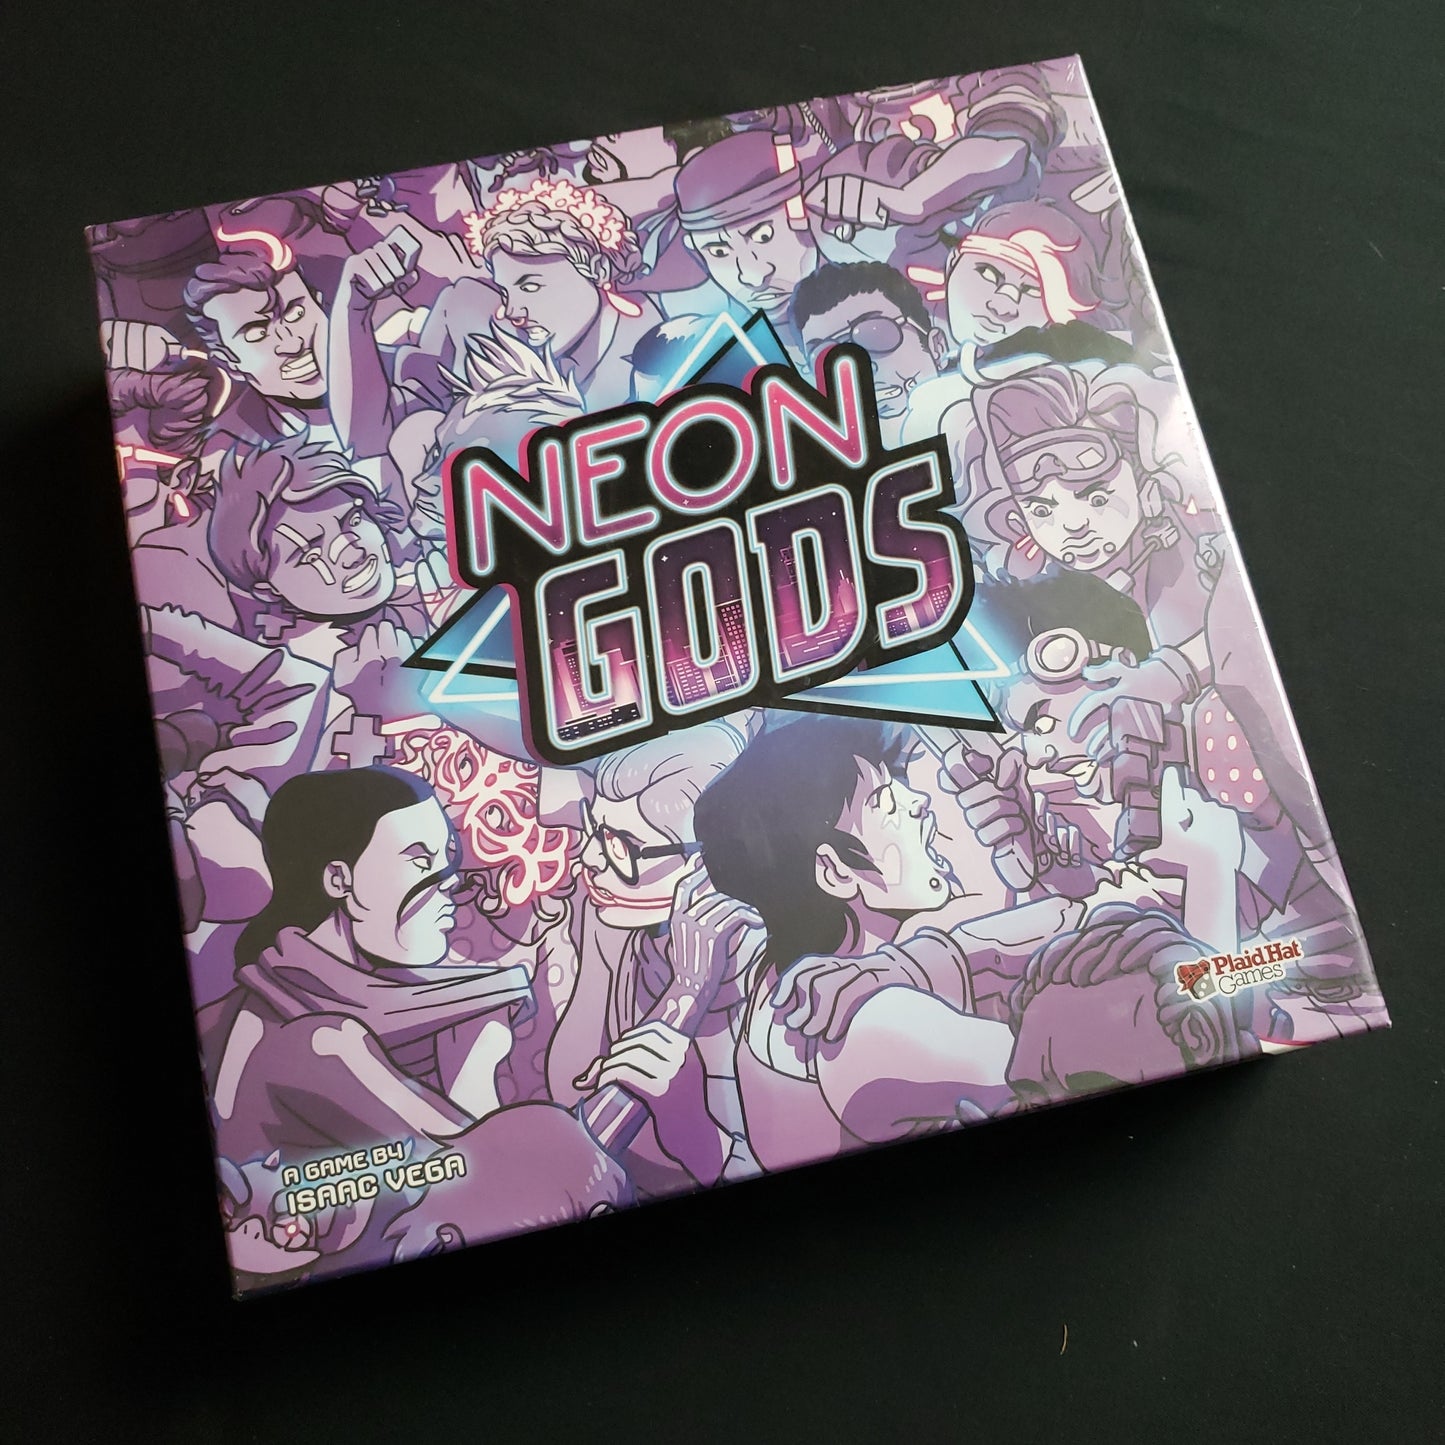 Image shows the front cover of the box of the Neon Gods board game